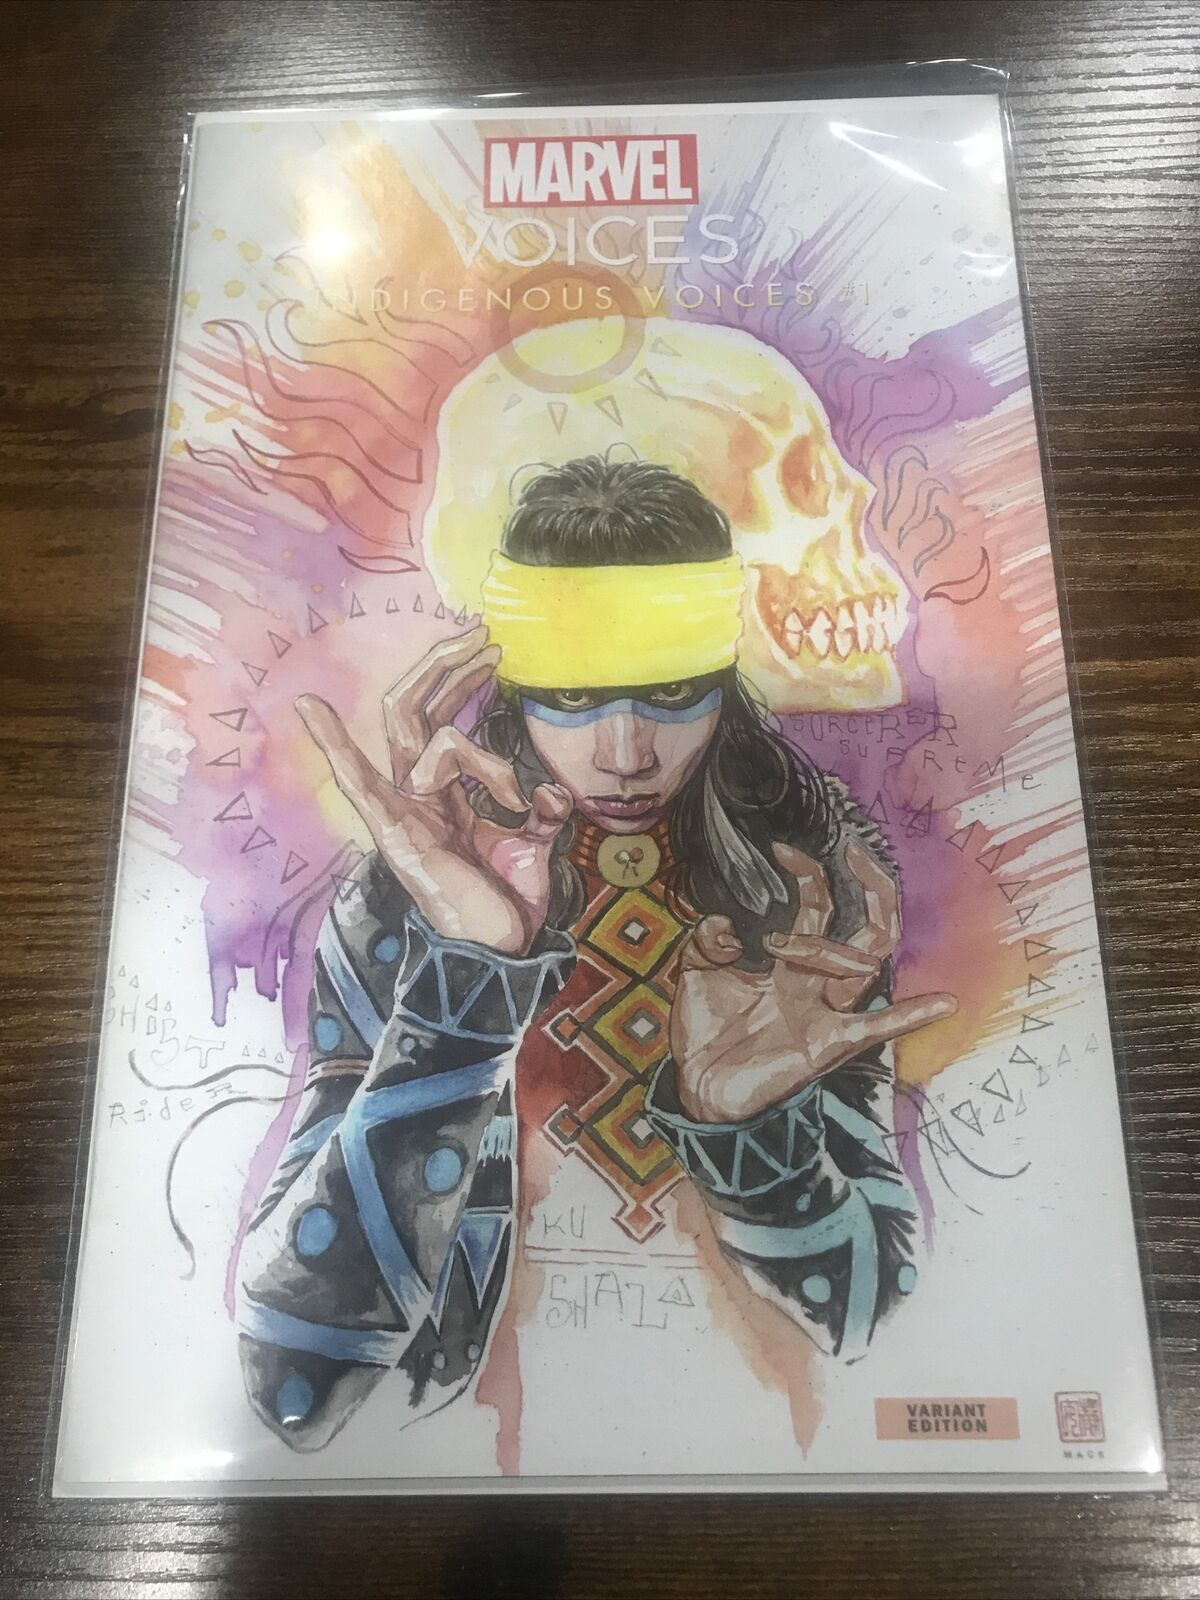 MARVEL'S INDIGENOUS VOICES #1 * NM+ * David Mack Exclusive Trade Variant 2020 🔥